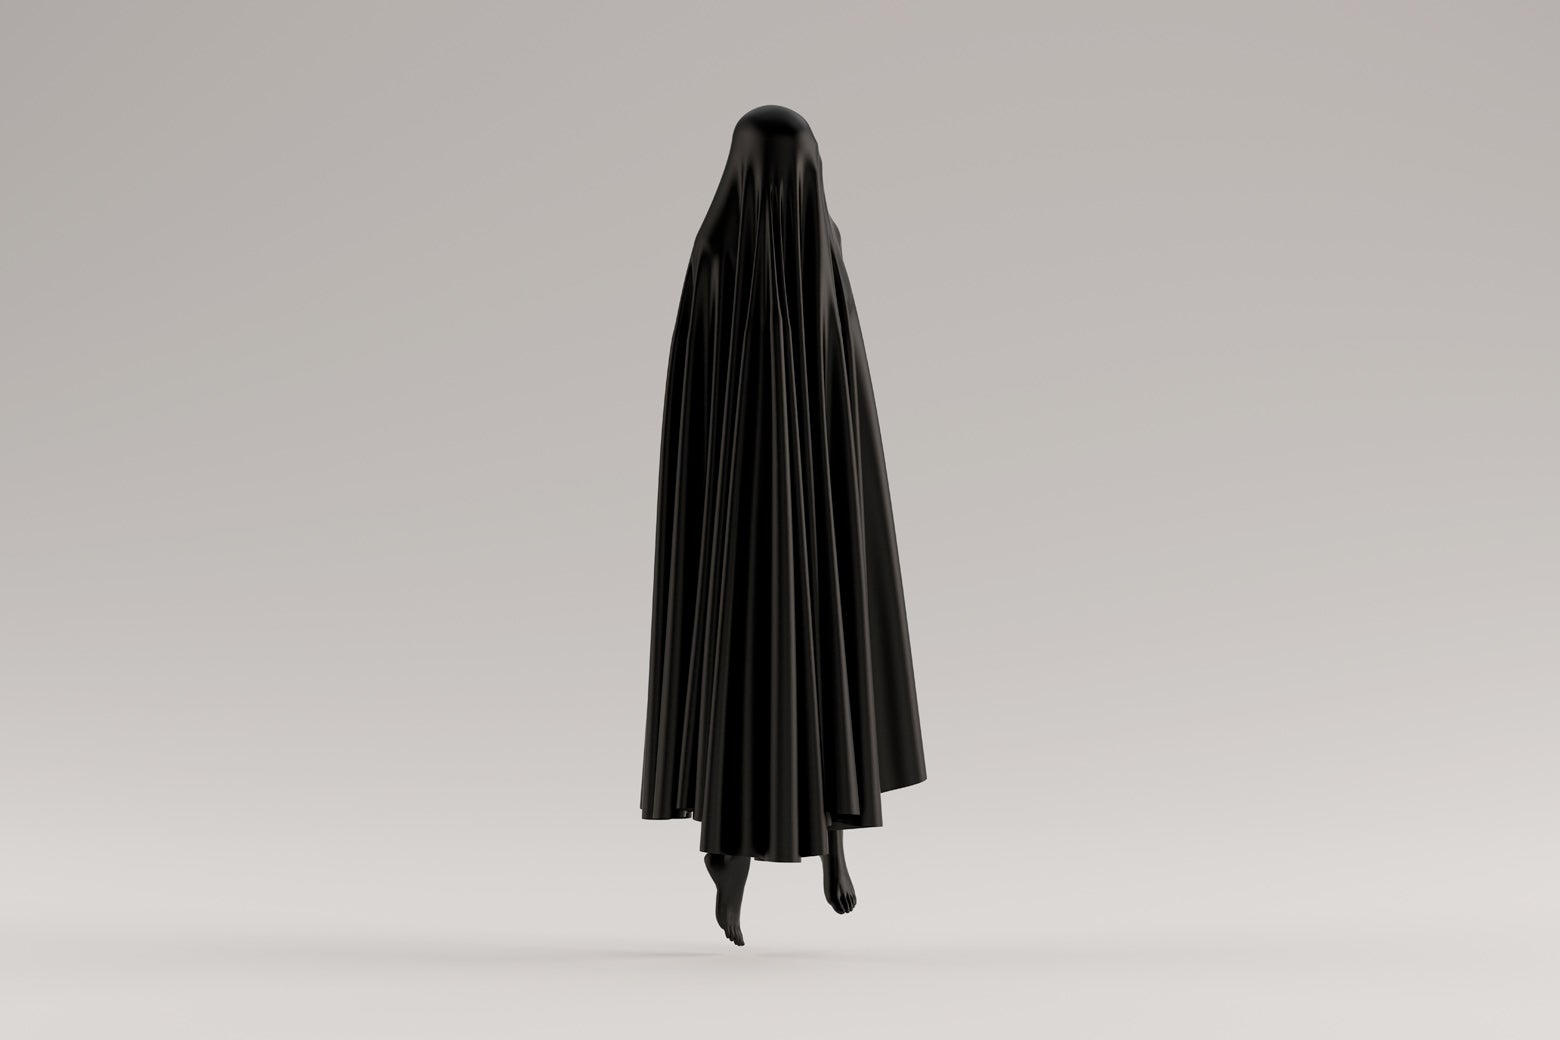 A levitating person is seen draped in a blank ghost sheet